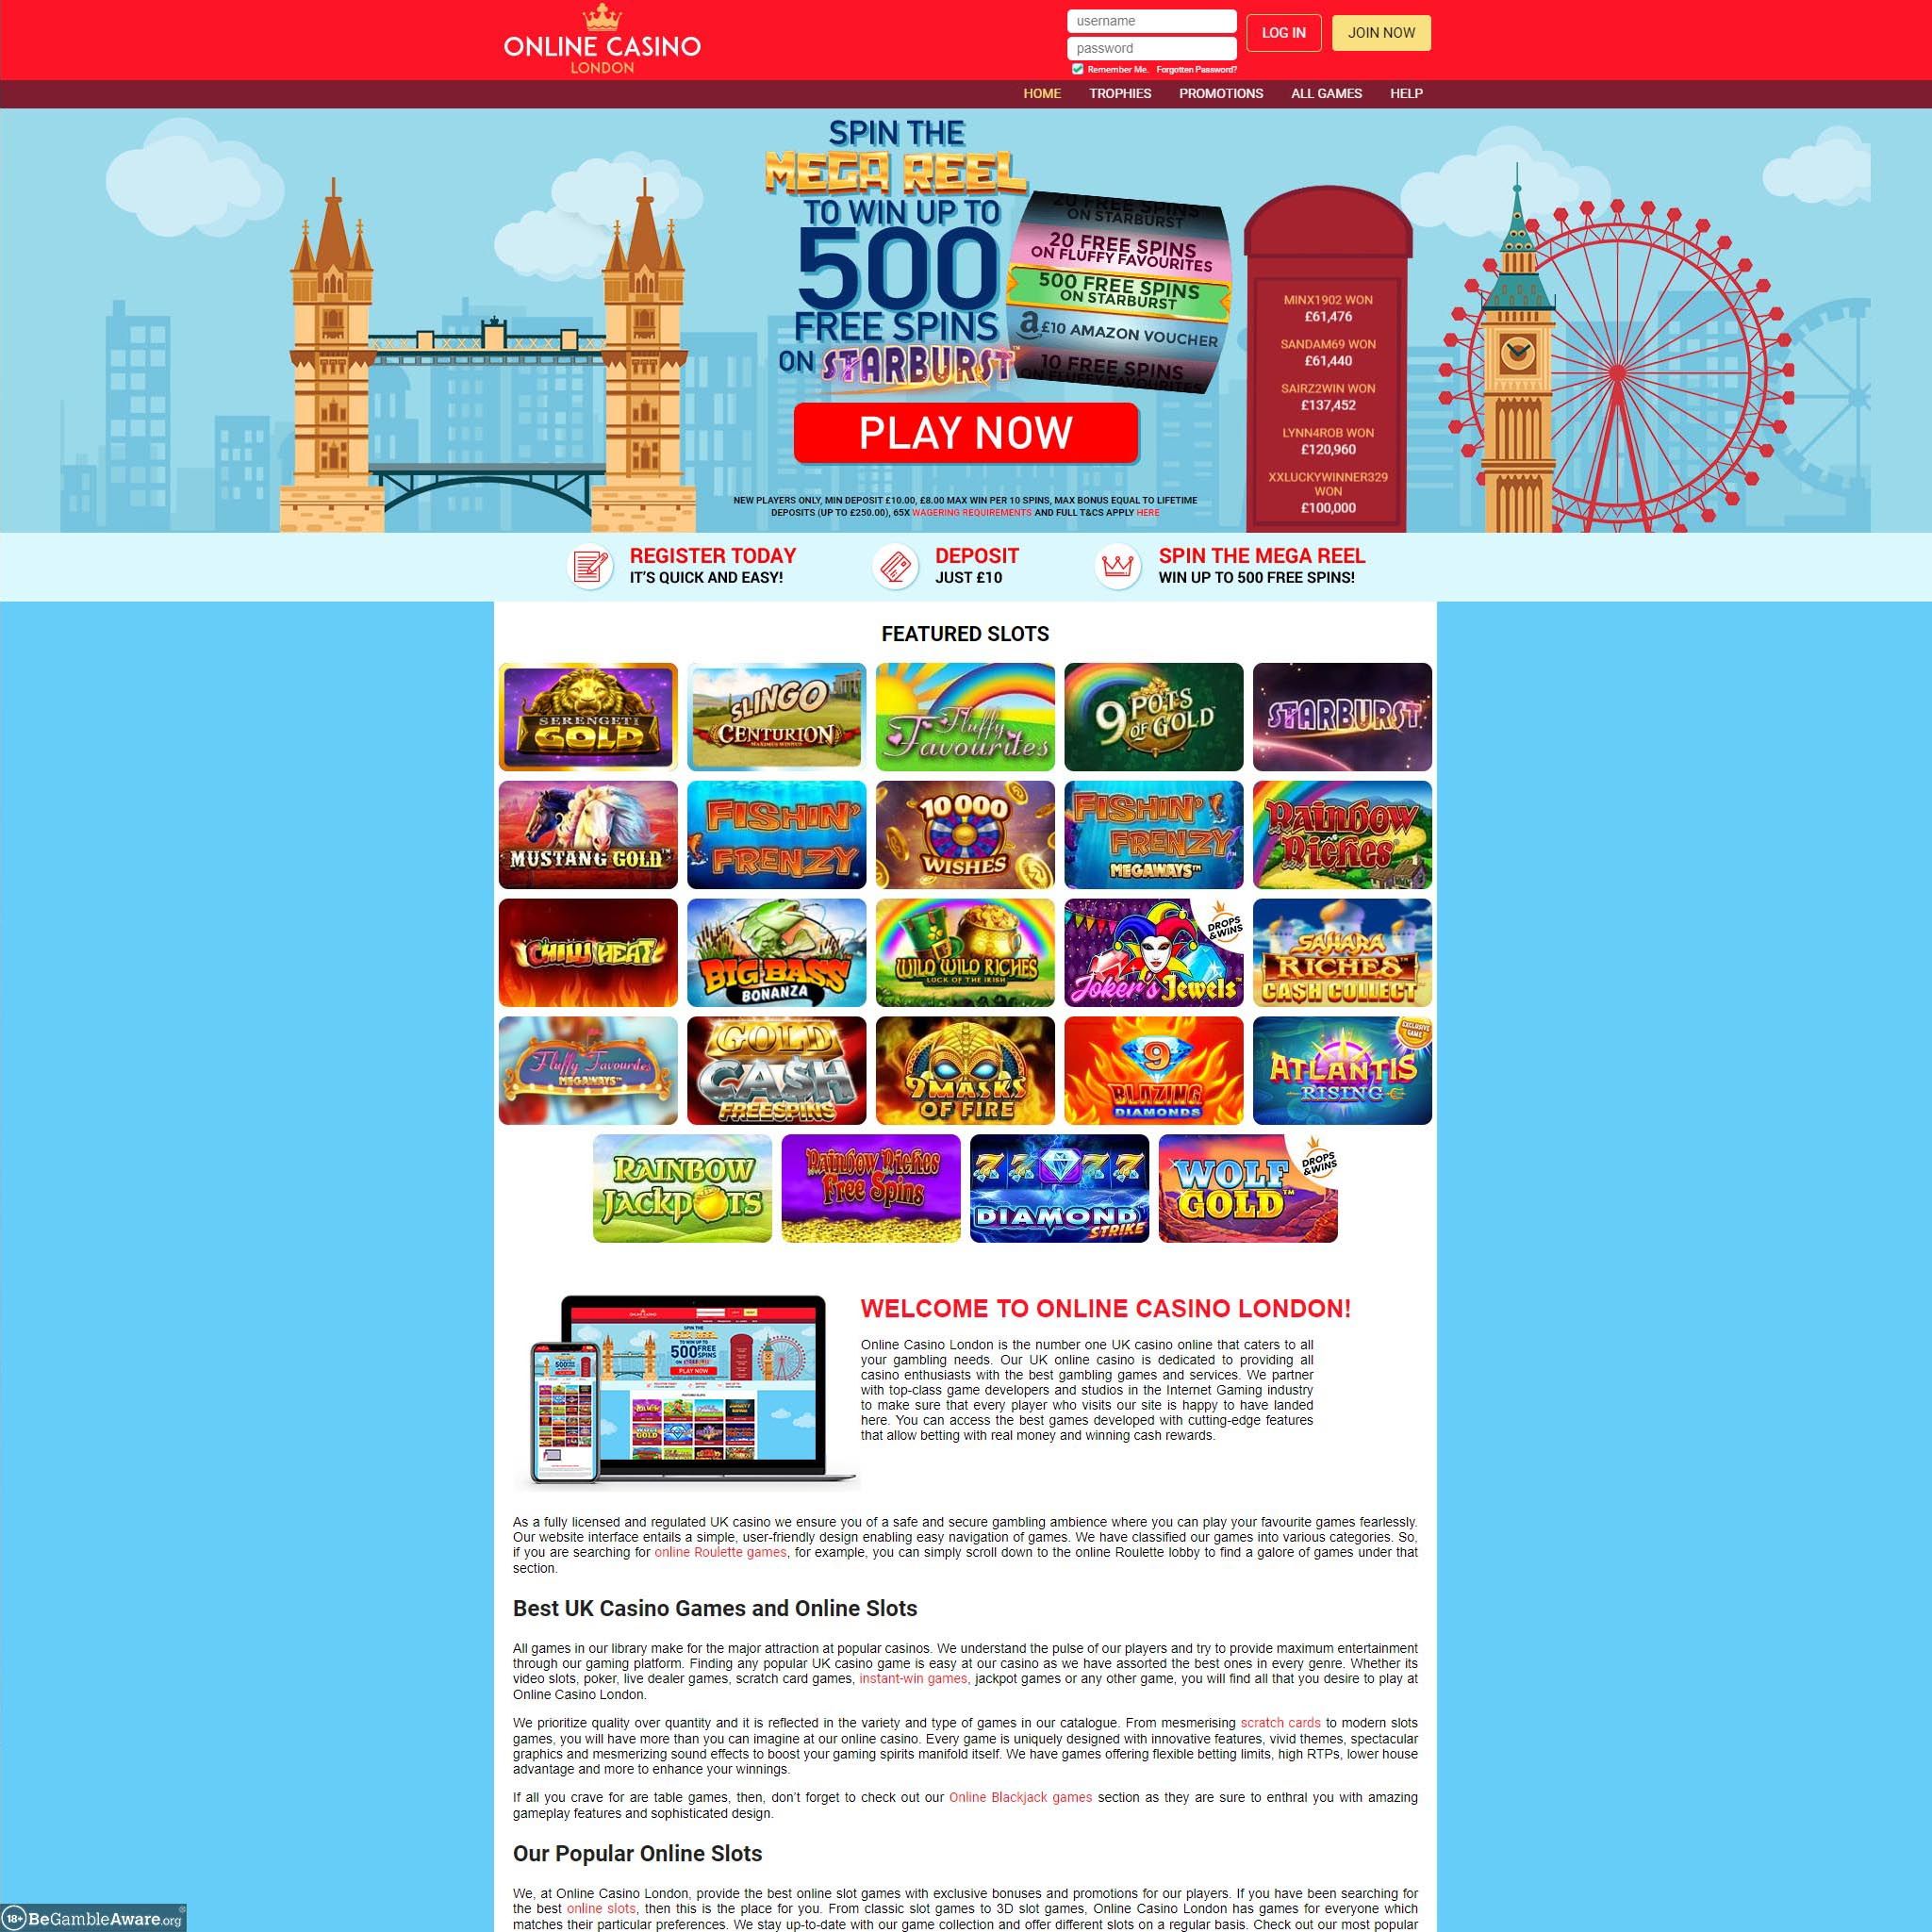 Online Casino London UK review by Mr. Gamble